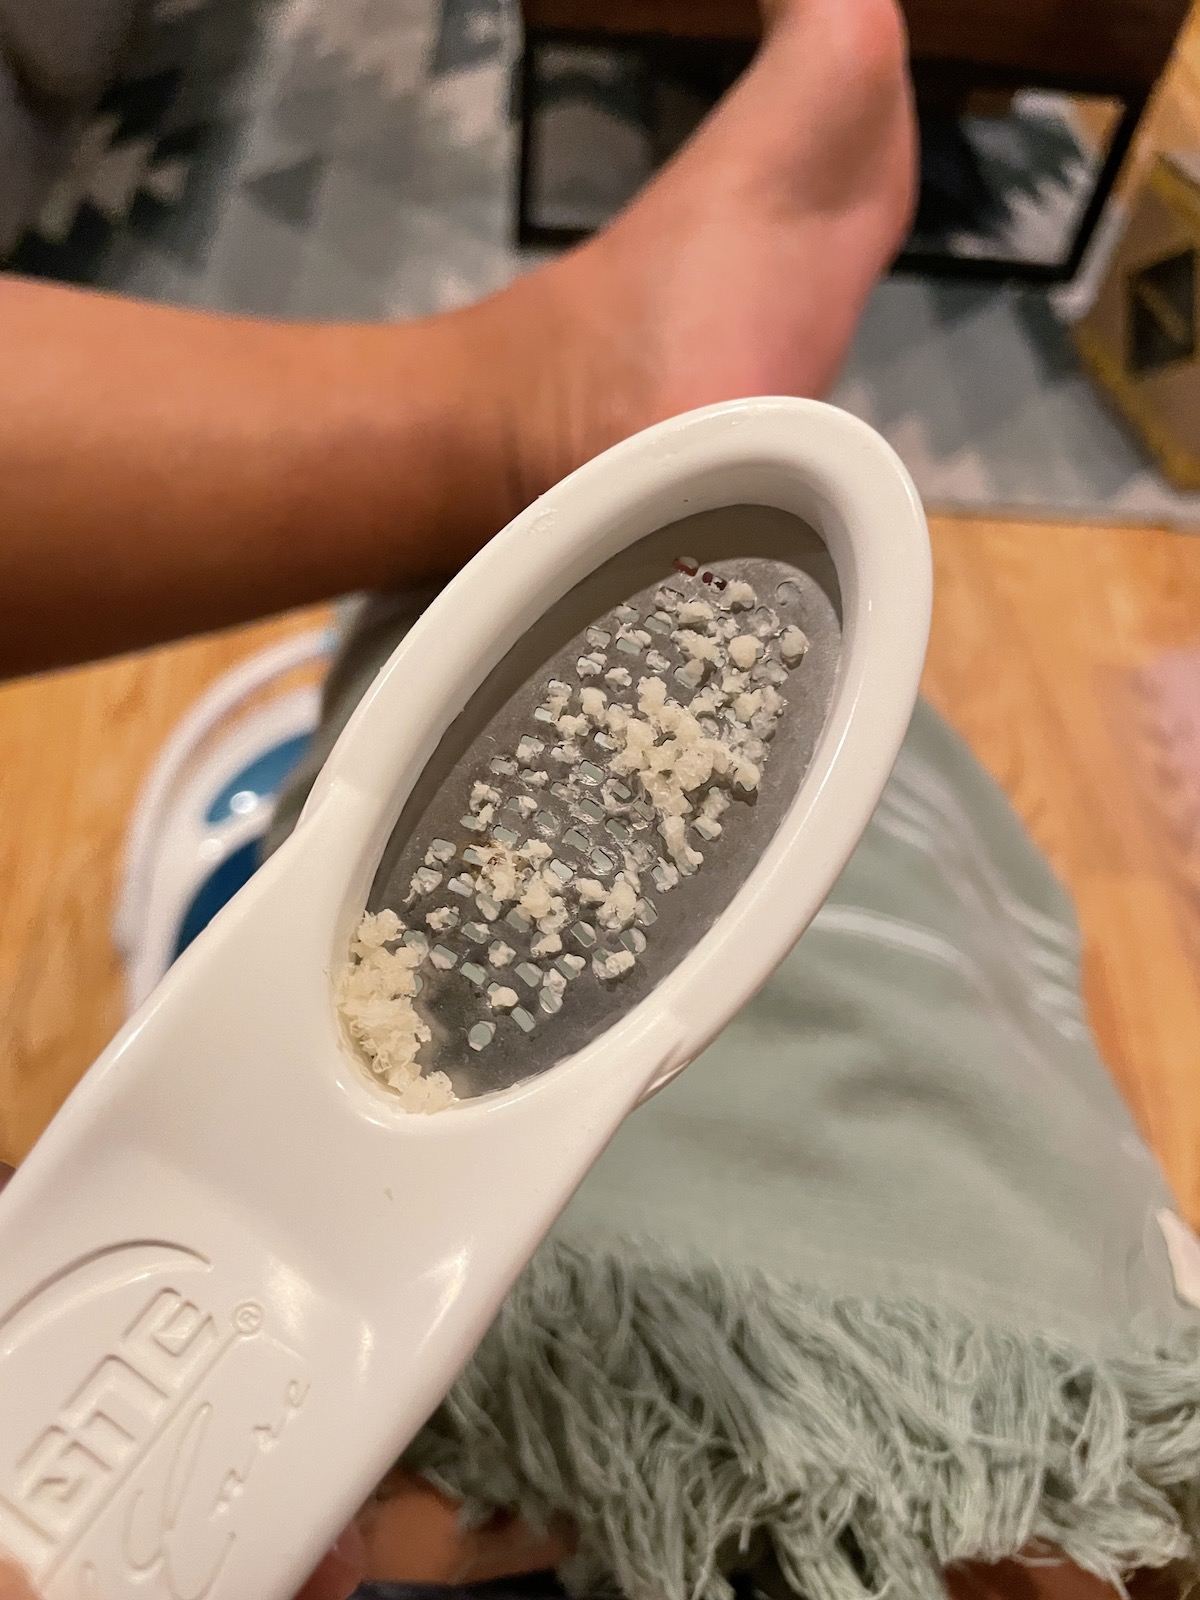 microplane foot file used to remove dead skin cells from feet